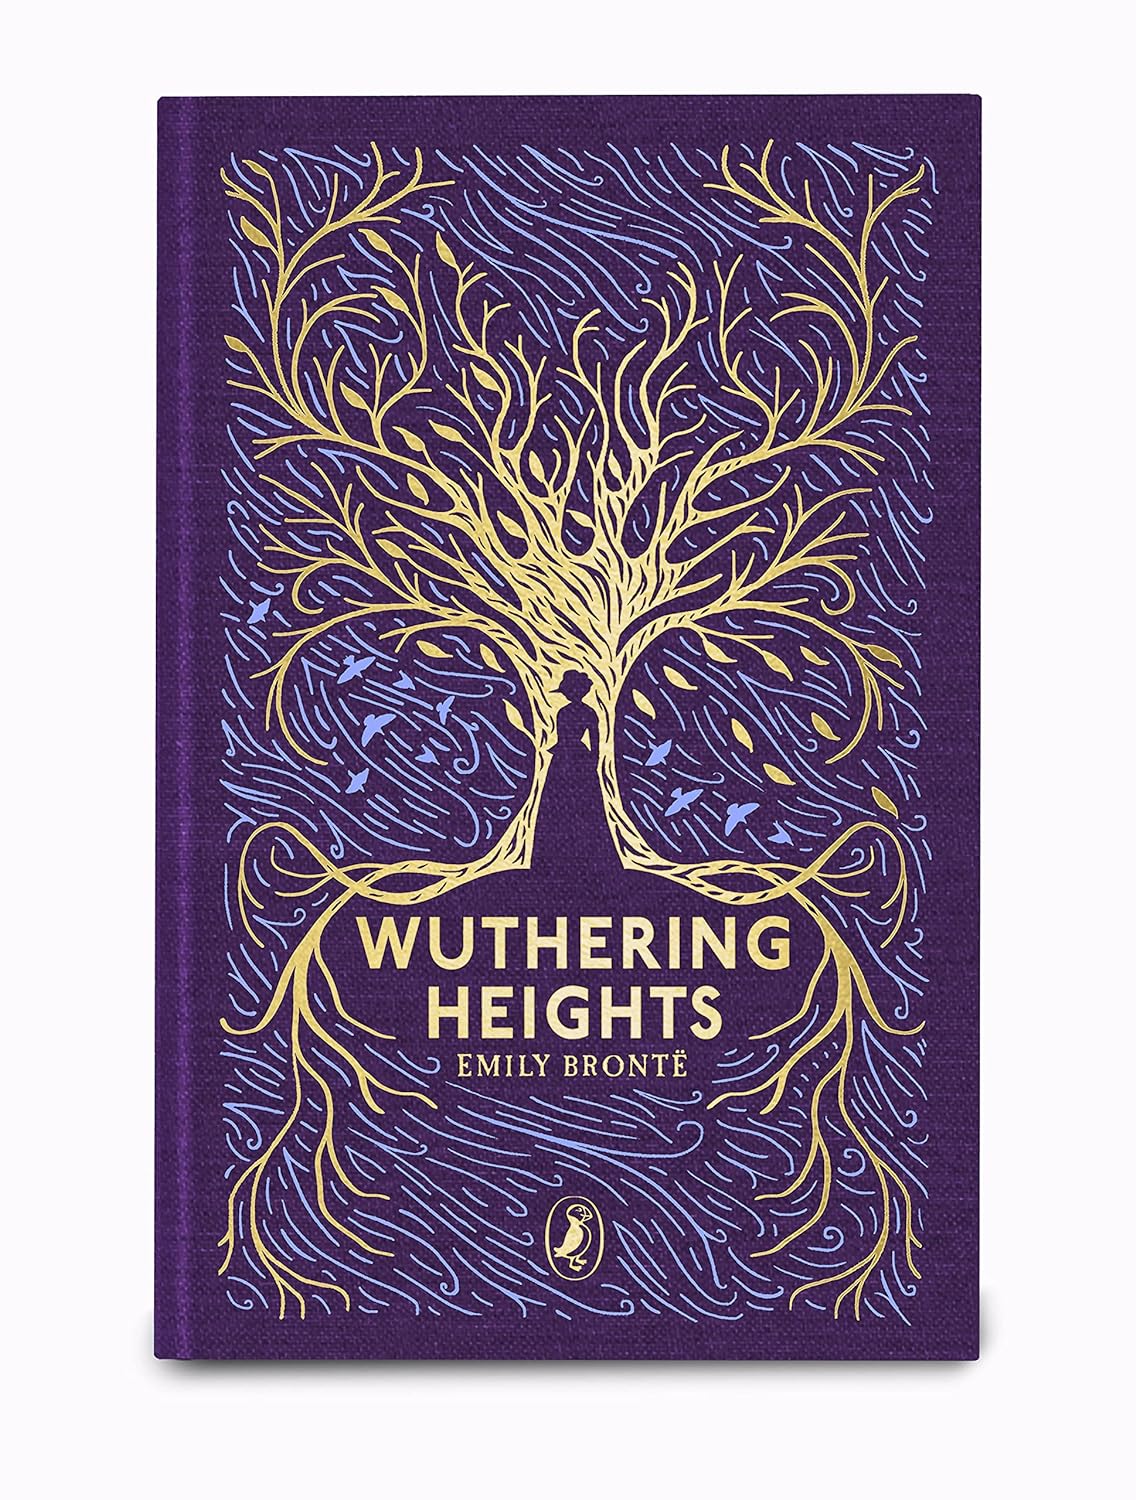 Wuthering Heights by Emily Bronte - Puffin Clothbound Classics Edition - Looking Glass Books -